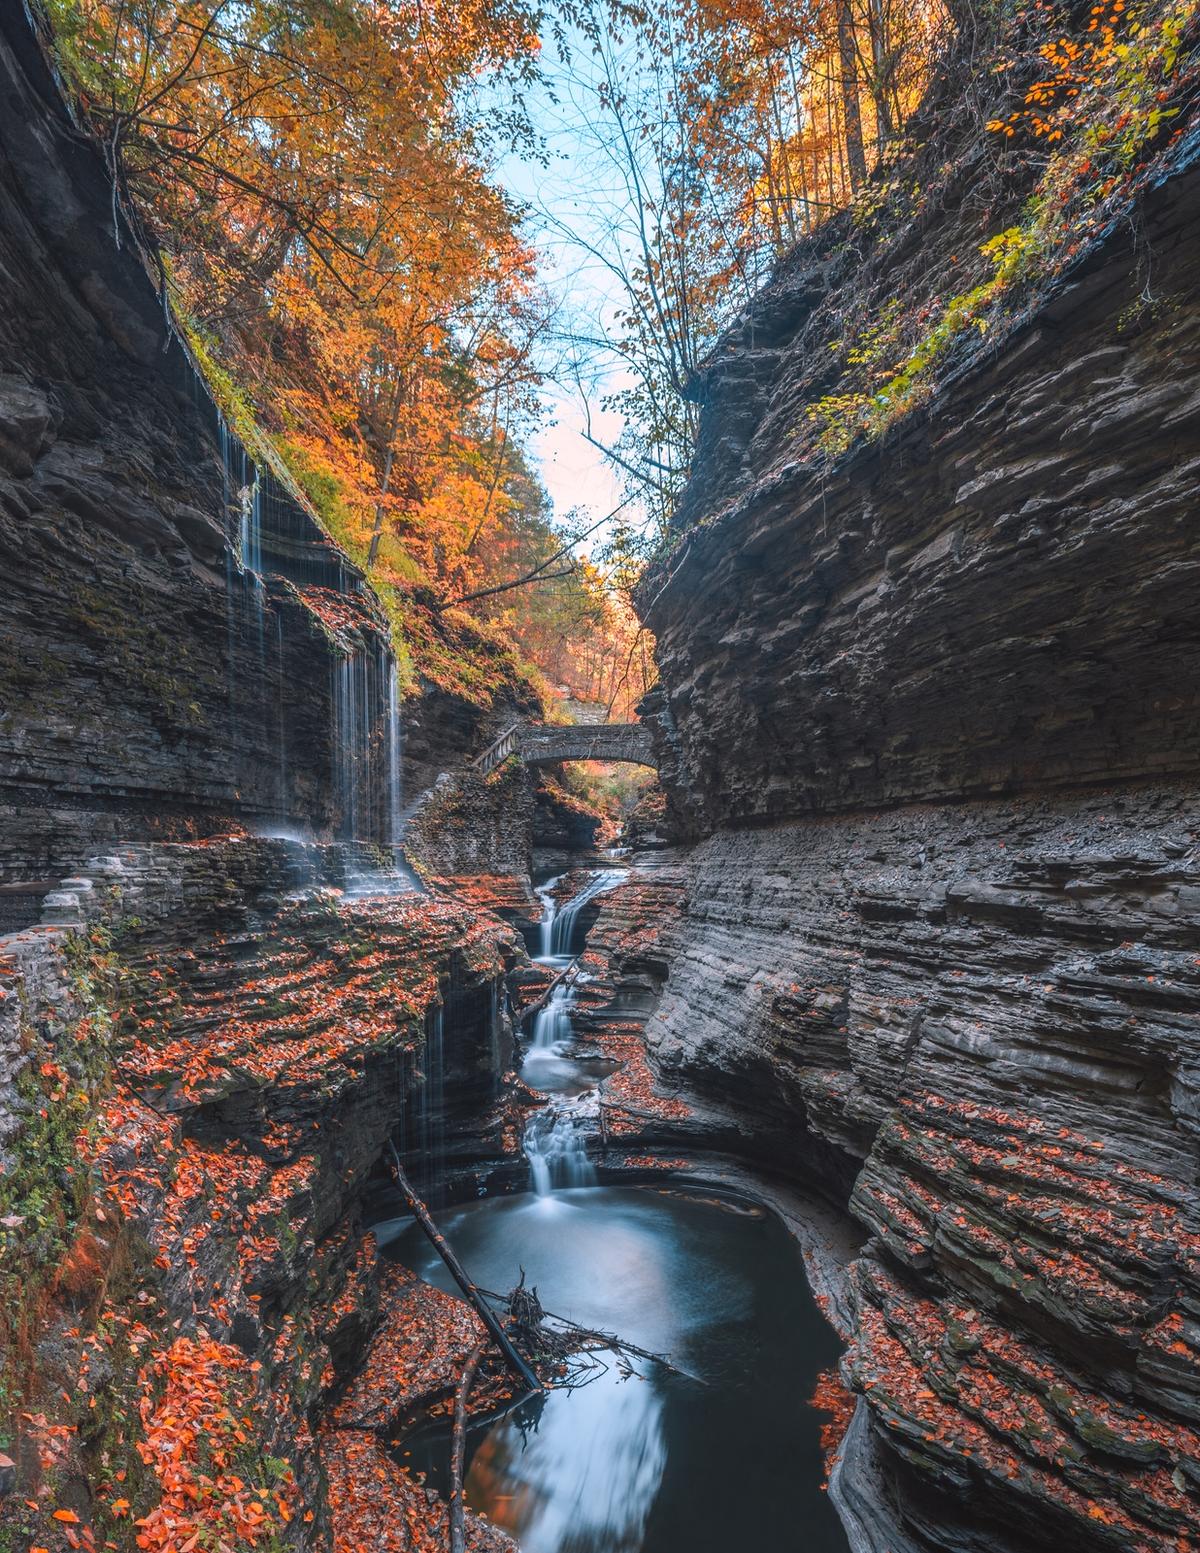 Trail along the gorge in Watkins Glen State Park